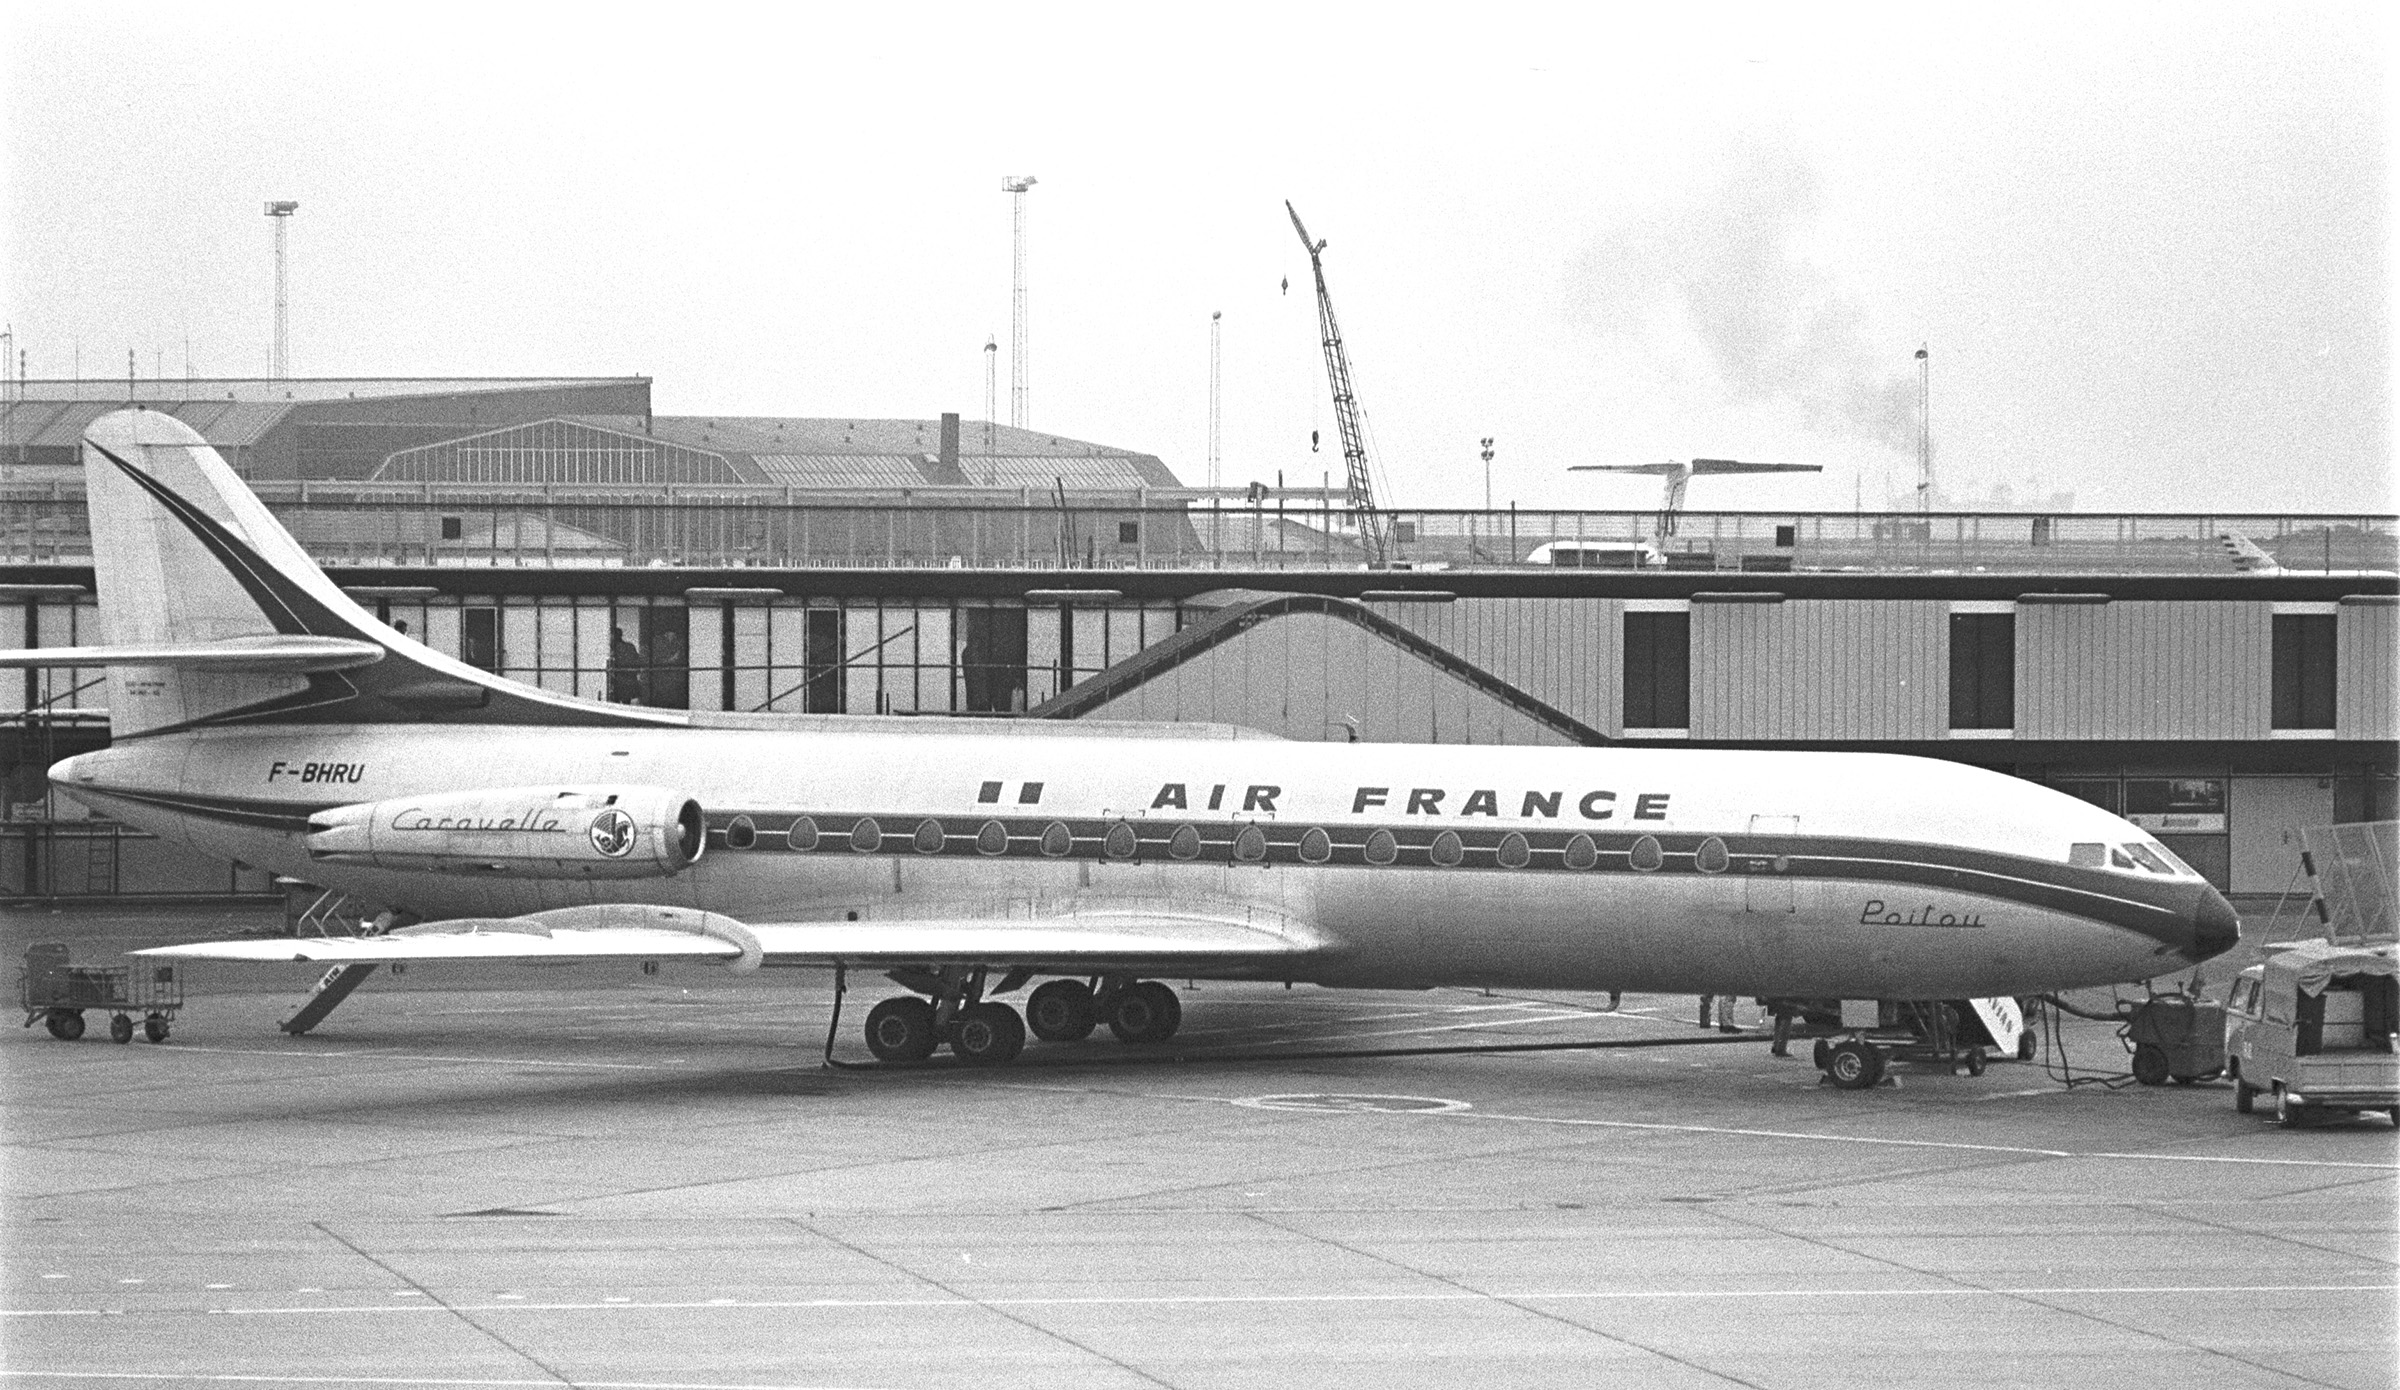 Sud Aviation SE-210 Caravelle F-BHRU, October 27th, 1969 - (photo by Nils Rosengaard via Nils Andersson)